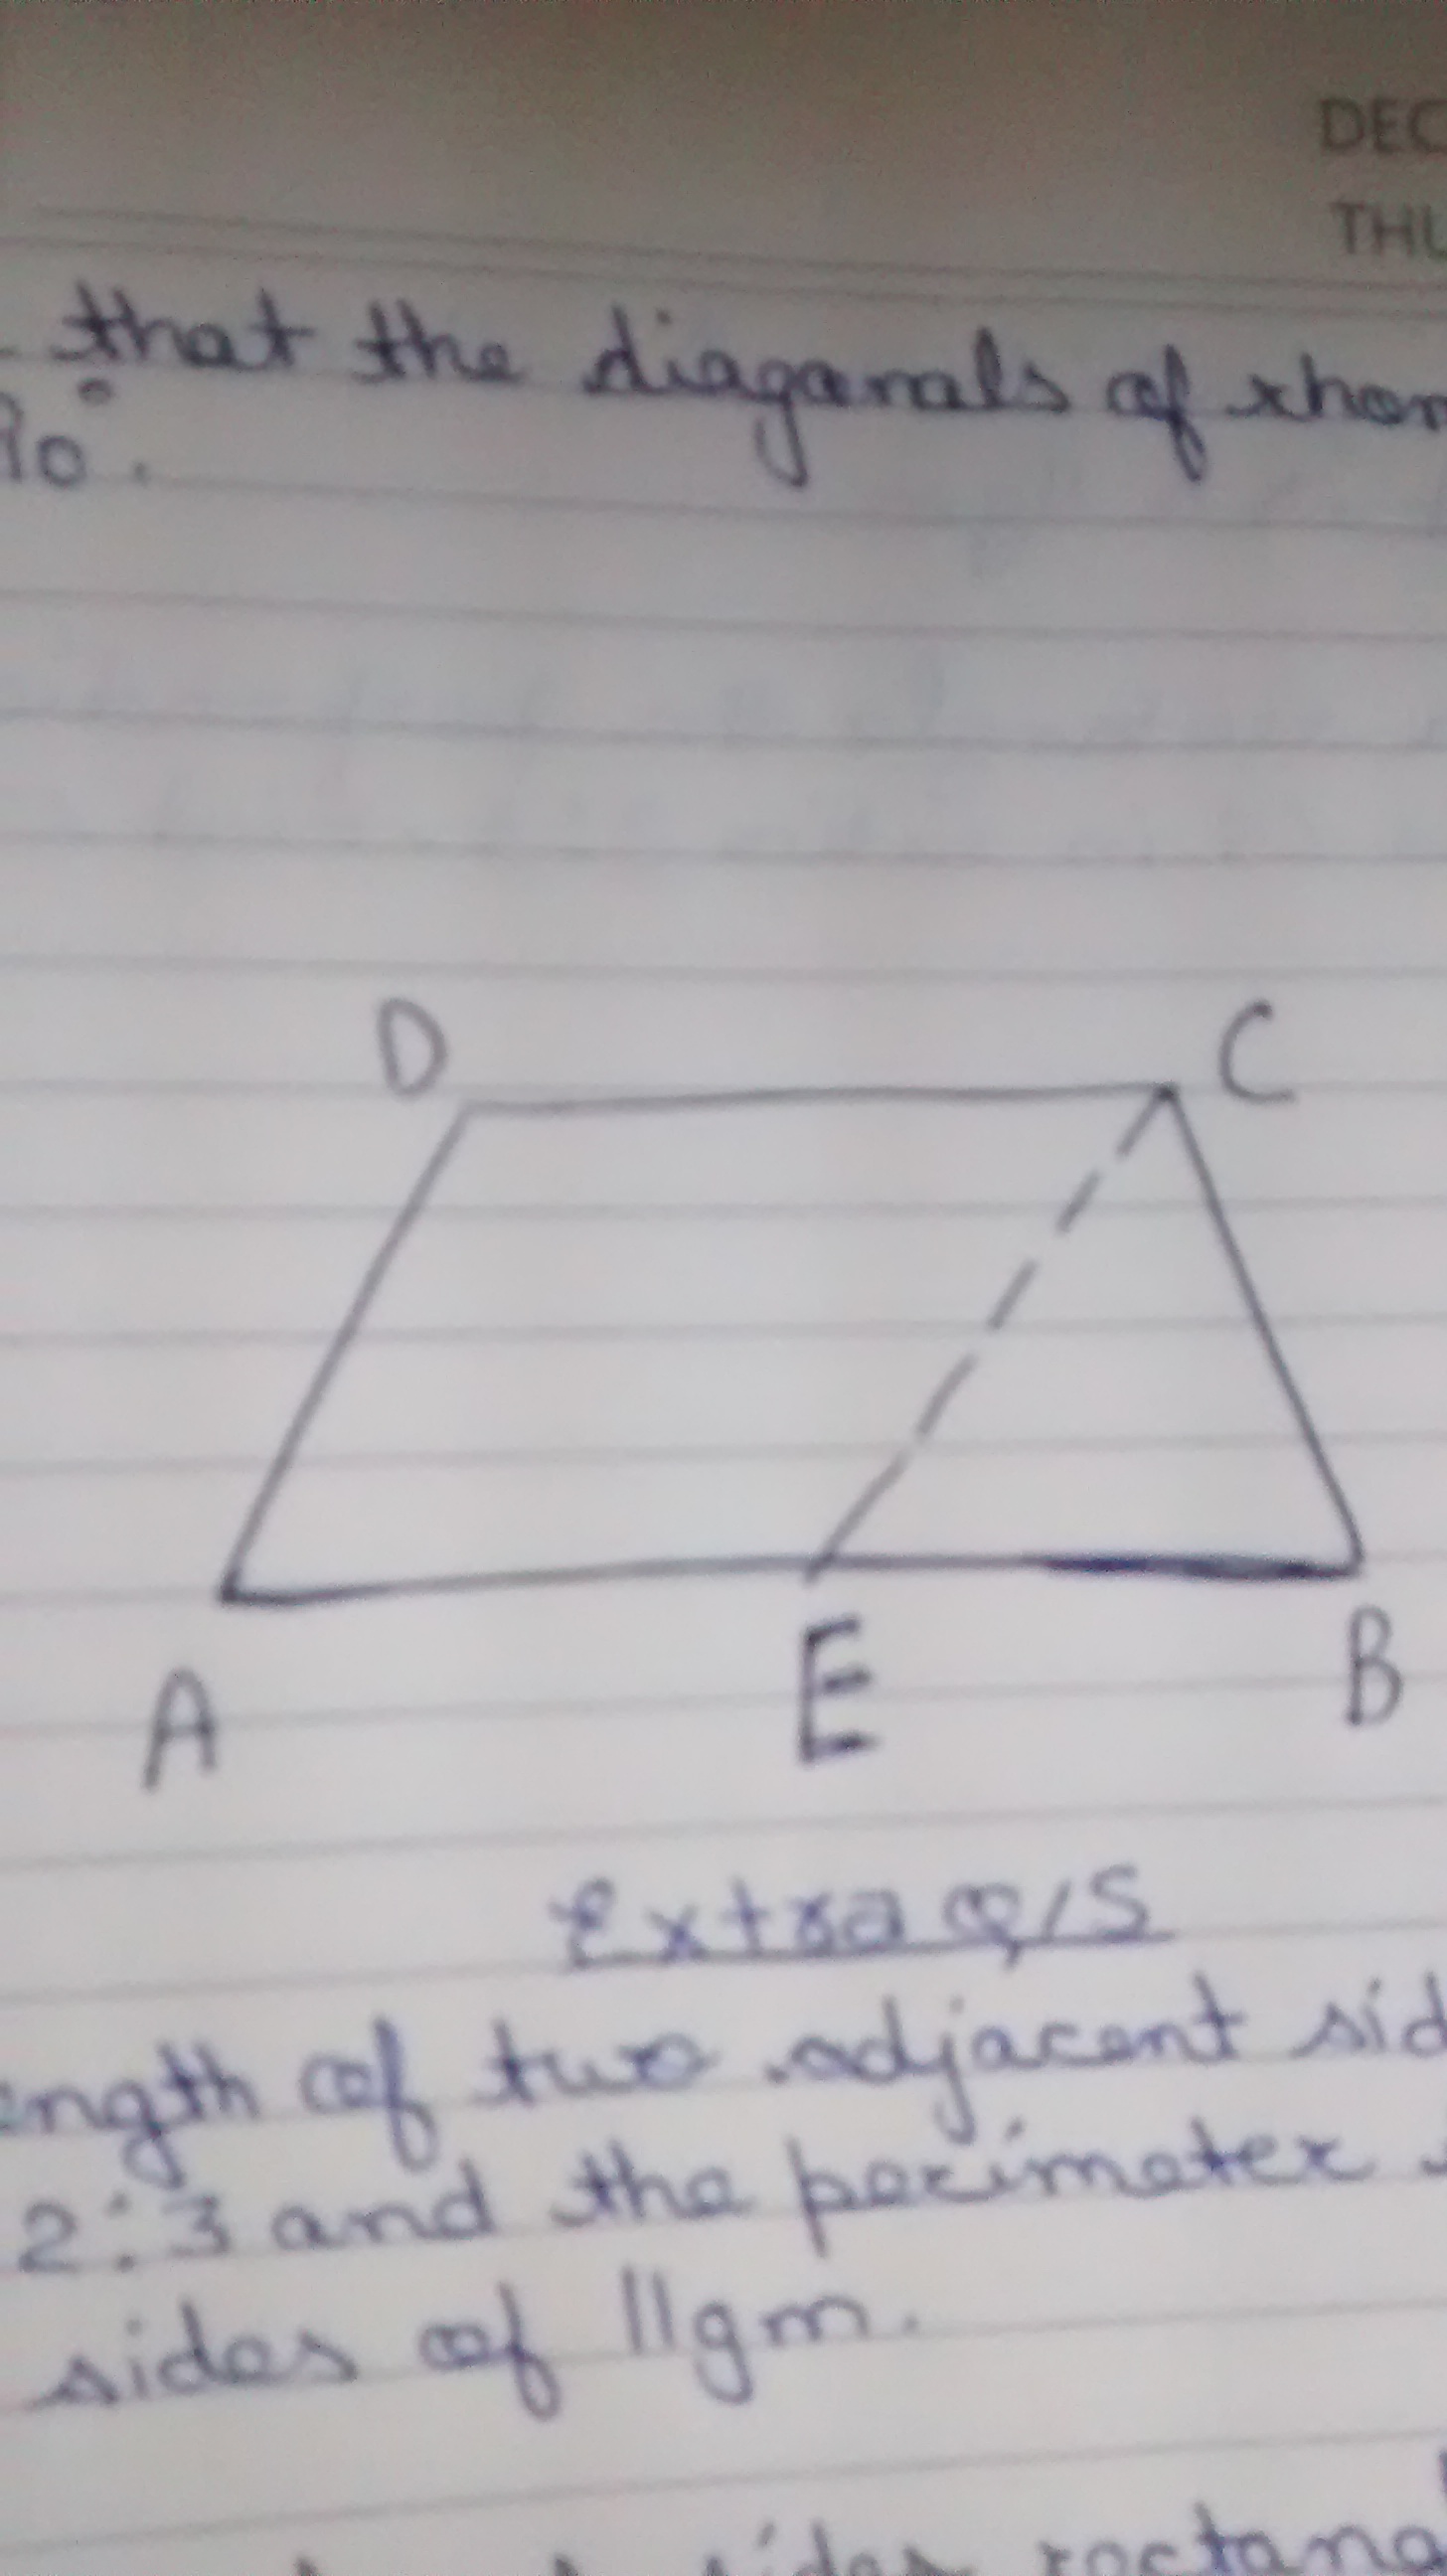 Abcd Is A Trep With Ab Dc And Ad Bc If Ad Is Parallel To Ce And